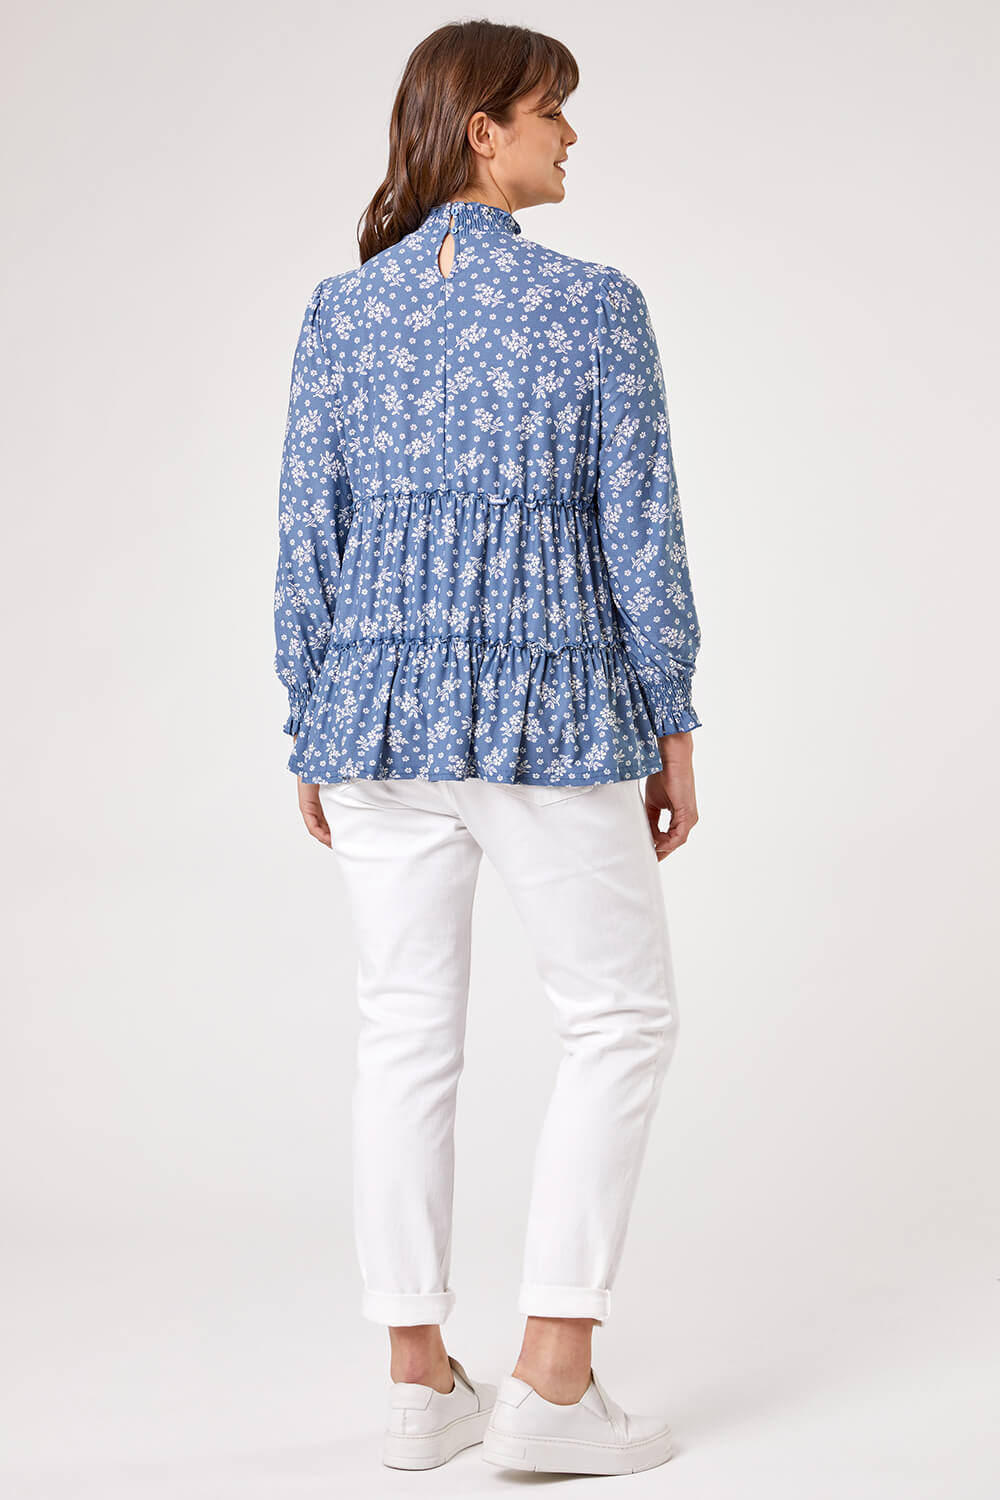 Blue Curve Tiered Floral Print Top, Image 2 of 5